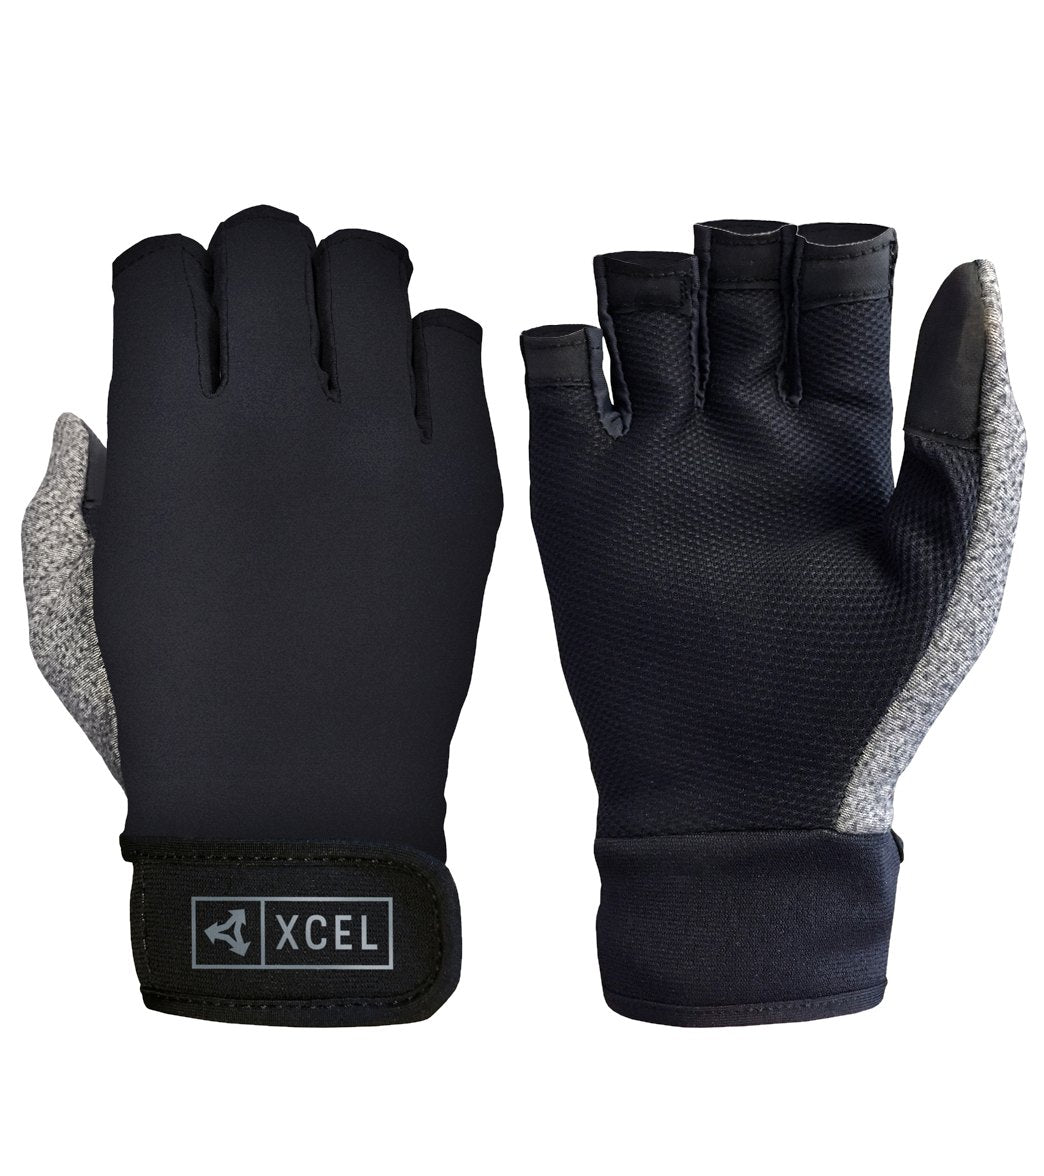 Xcel Paddle Glove Covered Thumb with Open Fingers at